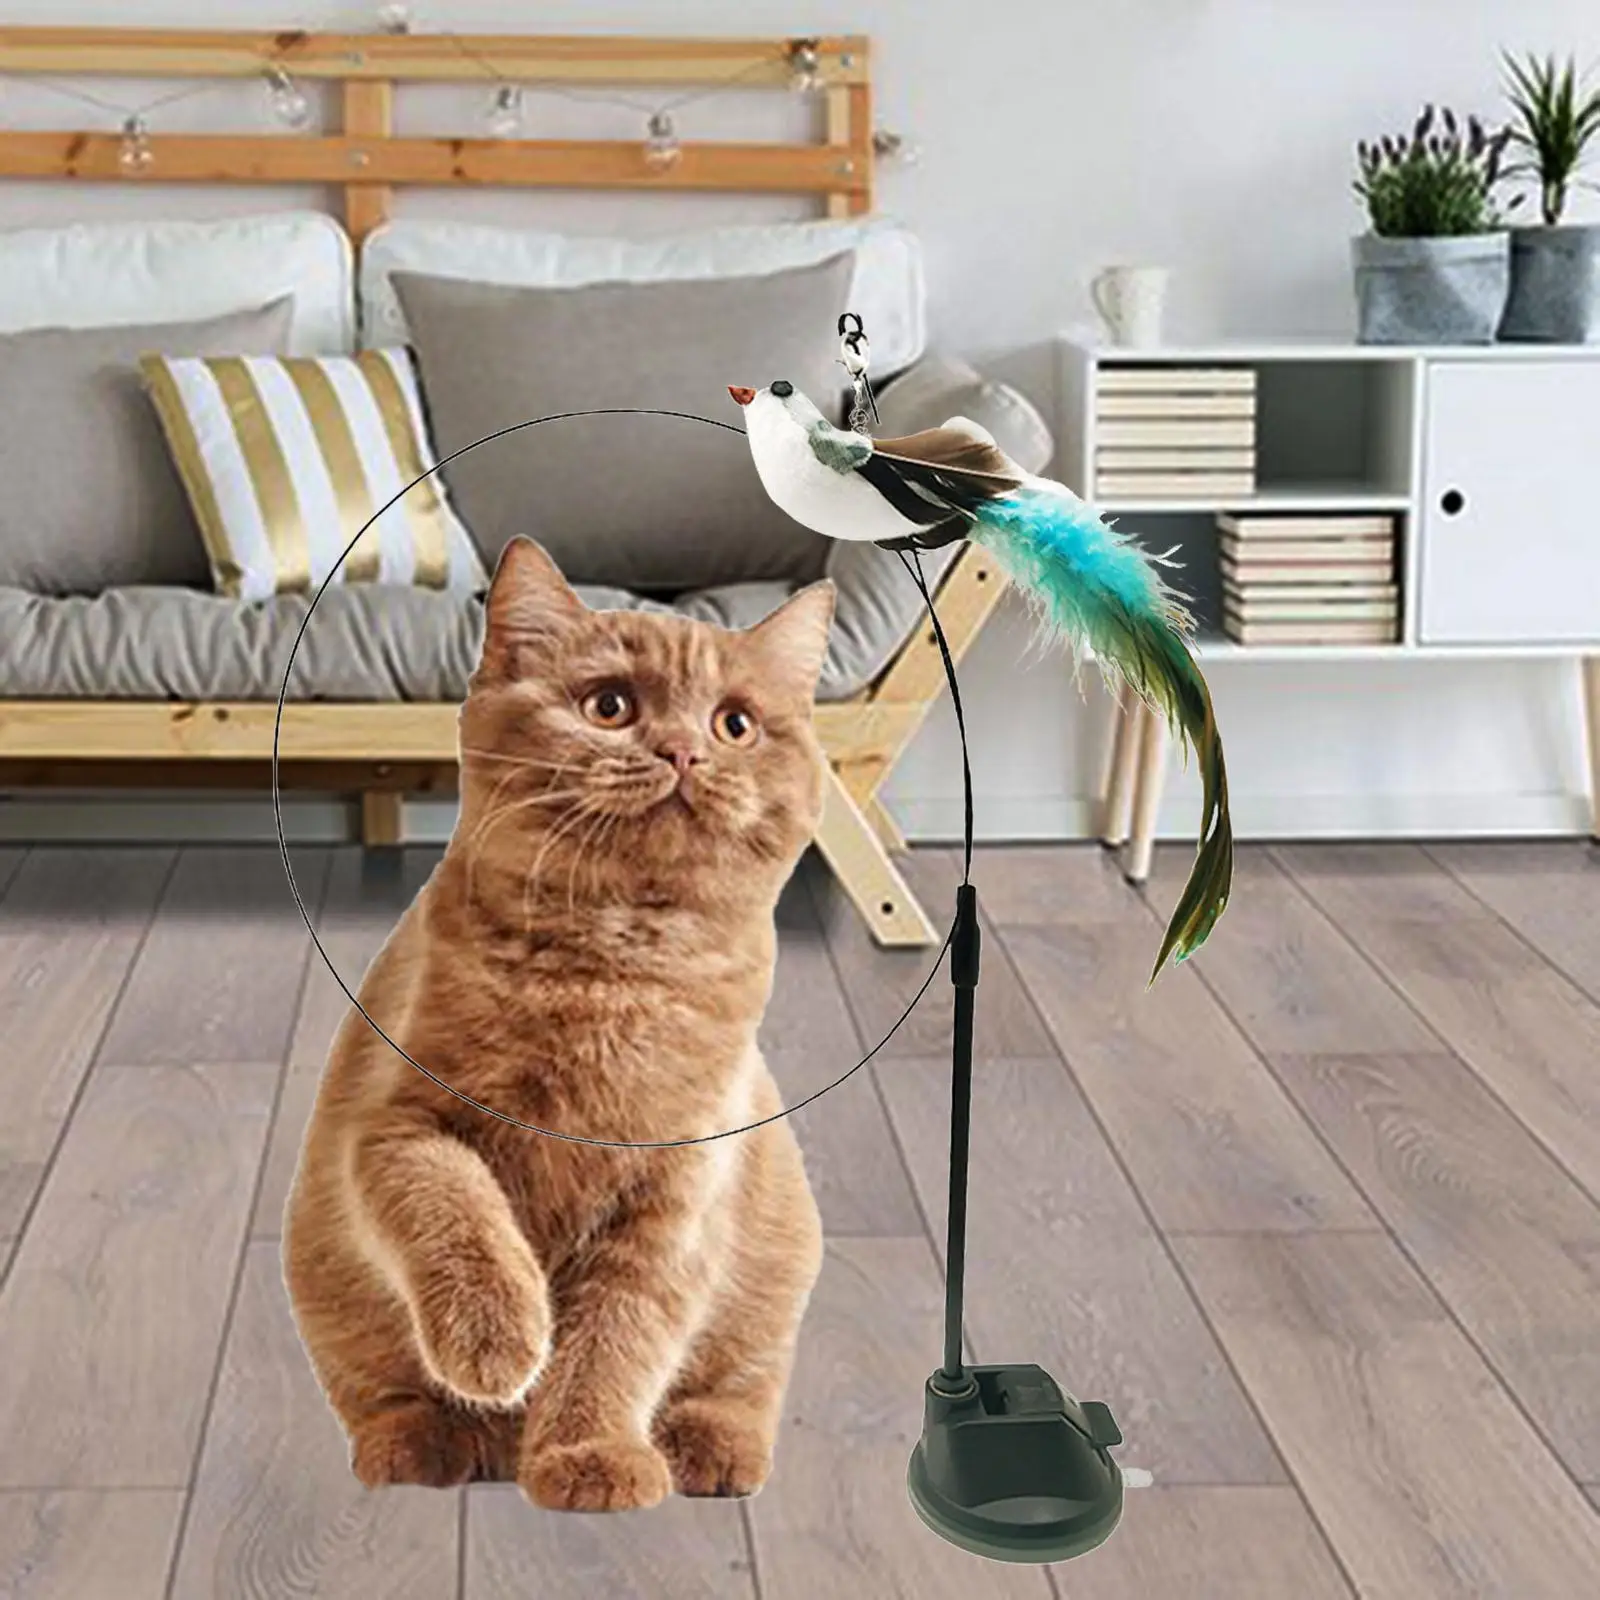 Simulation Bird Shape Feather Cat Stick Sucker Toy with Suction Cup, Cat Supplies Kitten Play Funny Good Tenacity with Bell